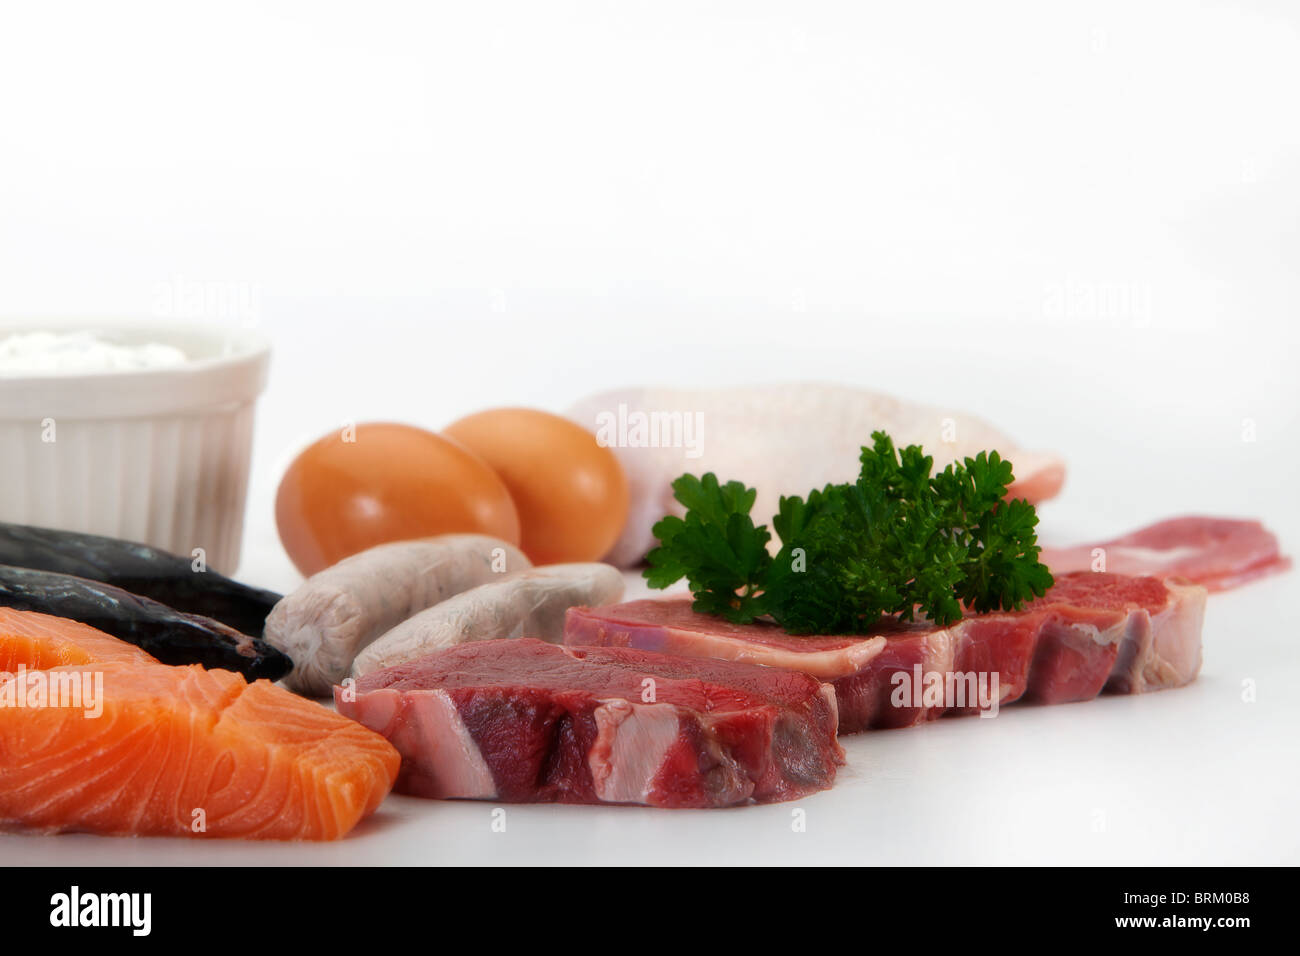 Close up image of protein rich foods with soft focus background Stock Photo